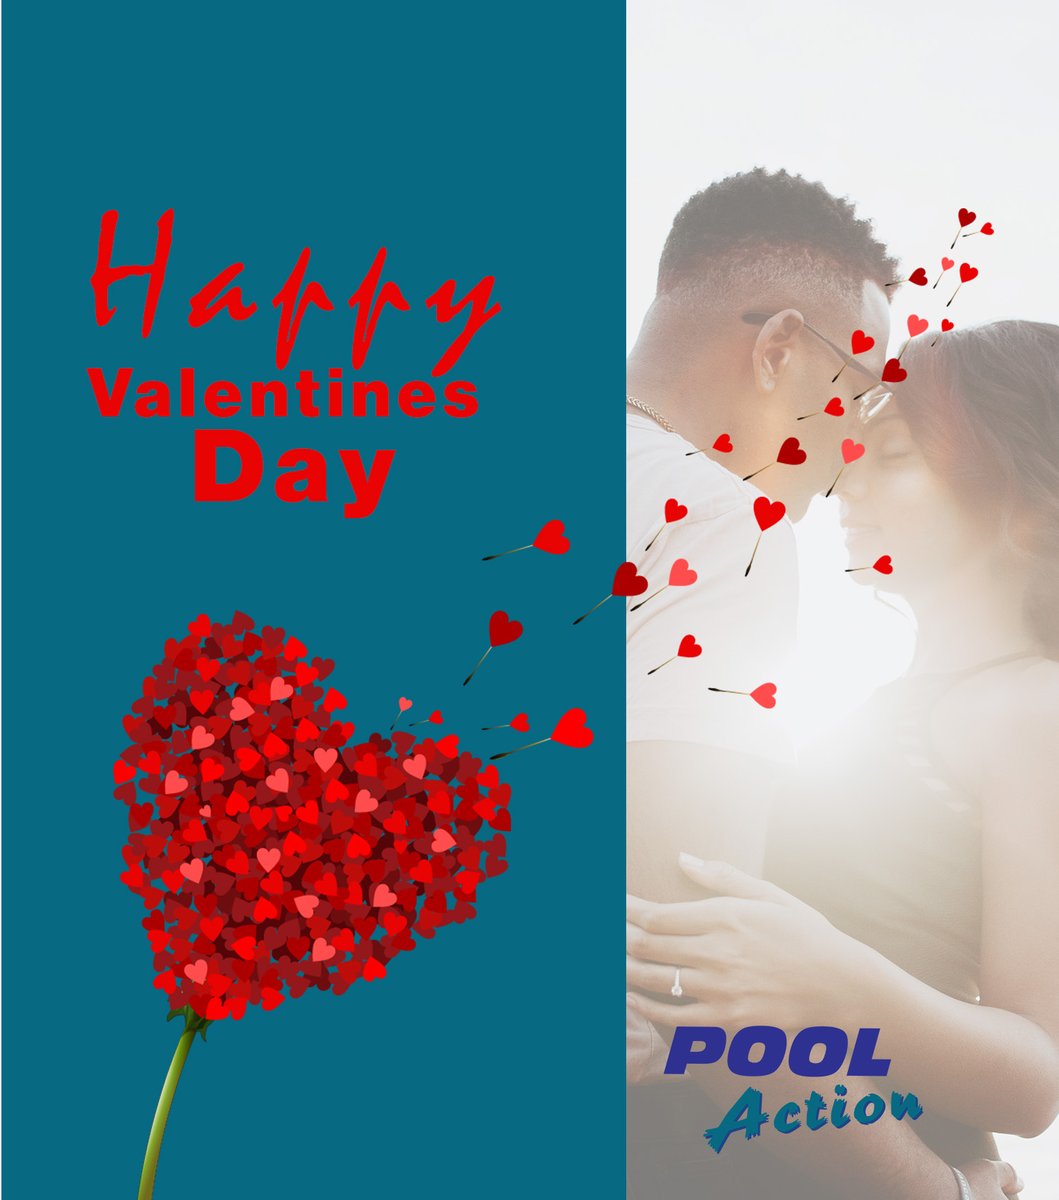 Valentines Day!!!
“ All you need is love. But a little chocolate now and then doesn’t hurt.” – Charles M. Schulz

We hope everyone has a wonderful day with their loved one and a day filled with joy and positivity!

#Valentinesday #filledwithjoy #poolaction